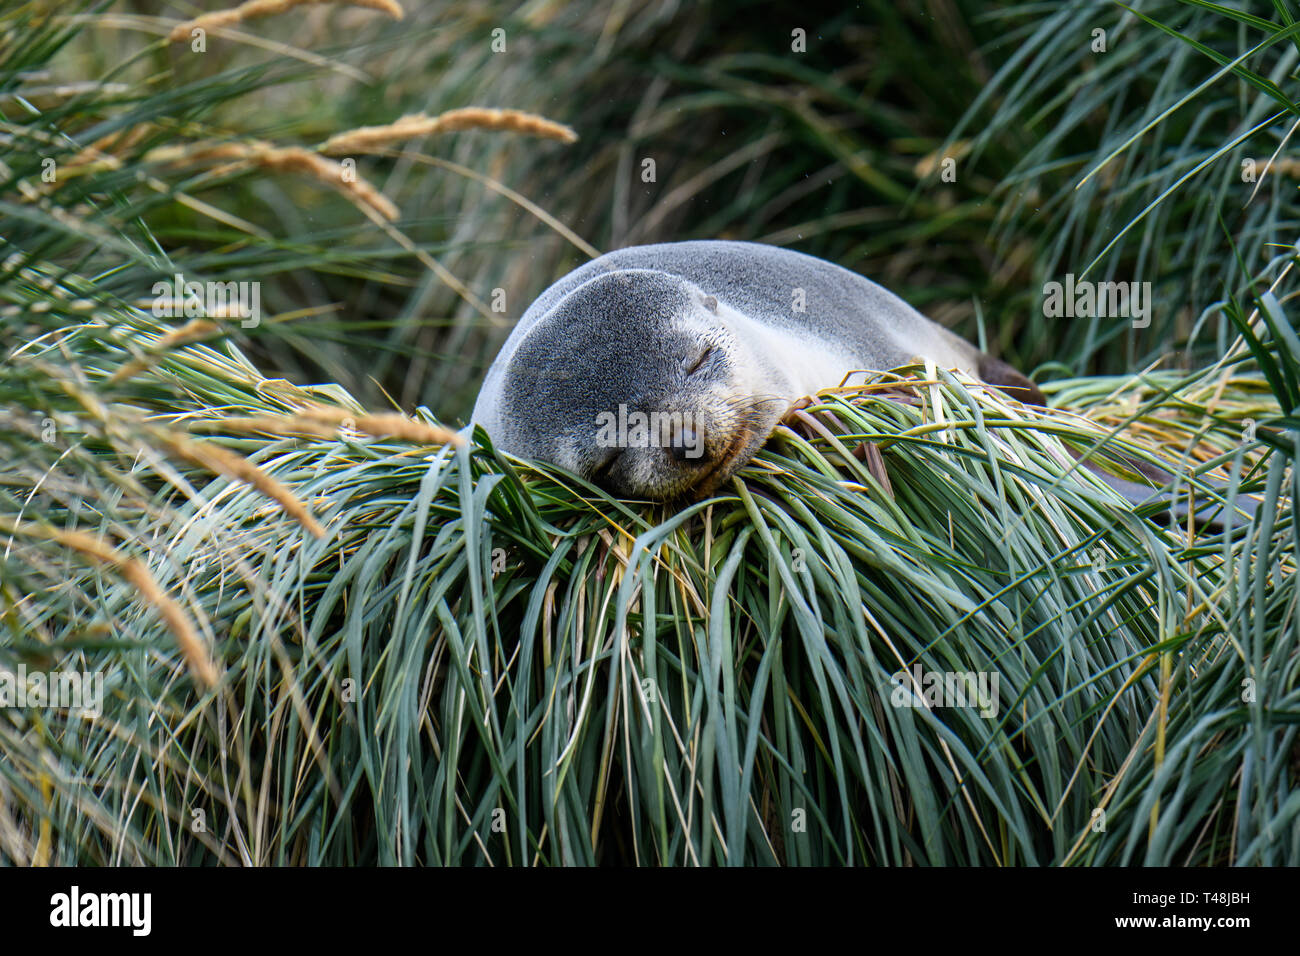 Female fur seal napping on a mound of native Tussac Grass in Jason Harbor, South Georgia Stock Photo